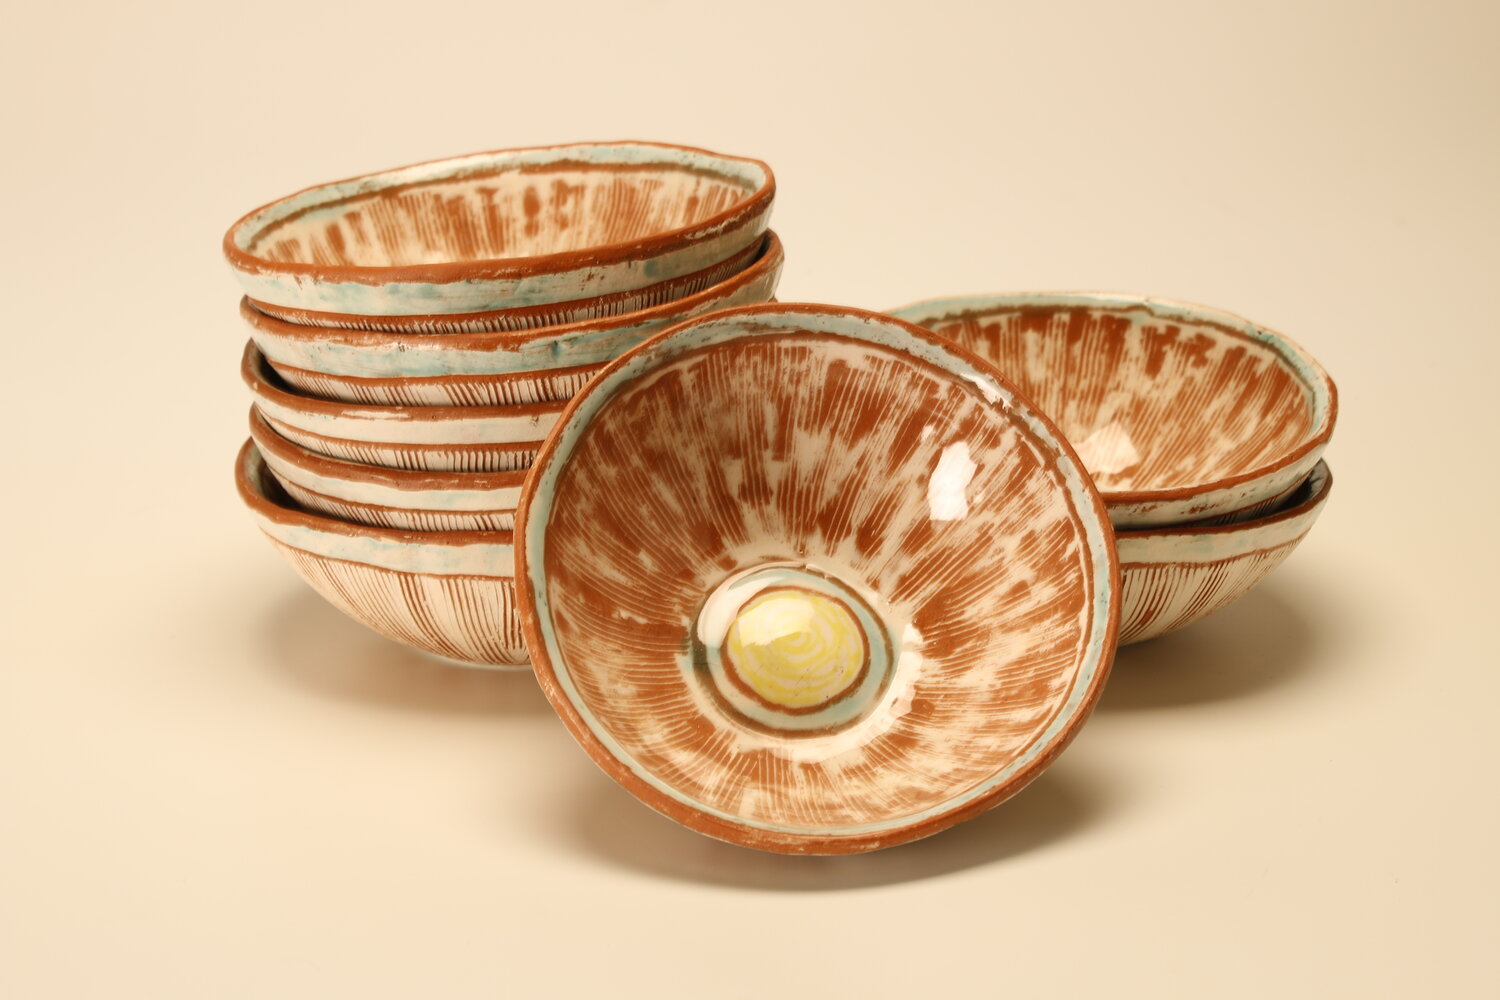 Stacks of everyday ceramic bowls with inlaid white slip and sgraffito, image courtesy of the artist